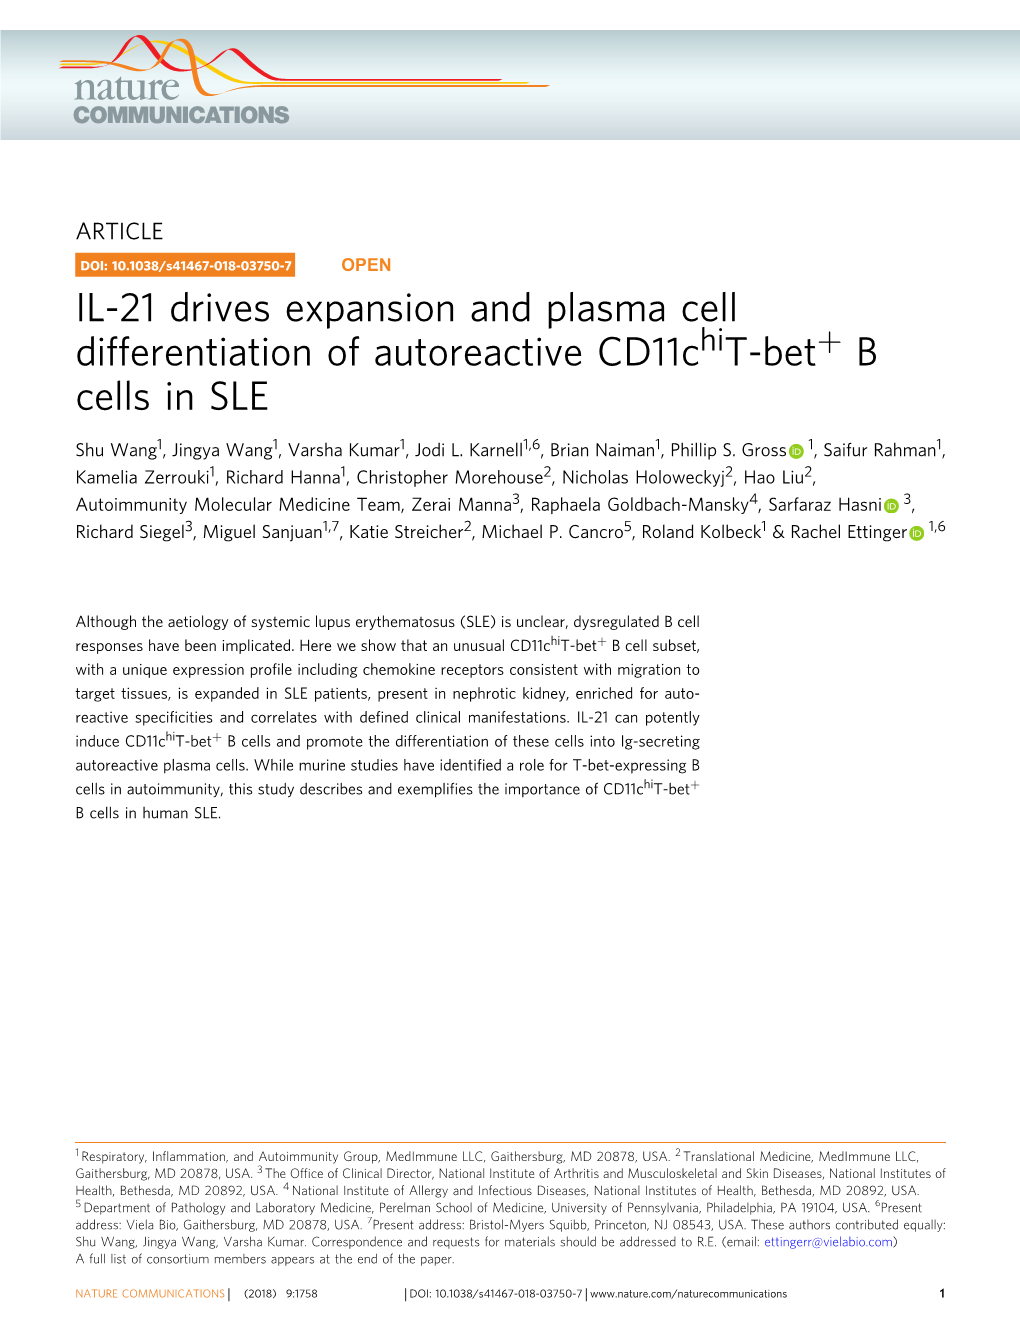 IL-21 Drives Expansion and Plasma Cell Differentiation of Autoreactive Cd11chit-Bet+ B Cells in SLE